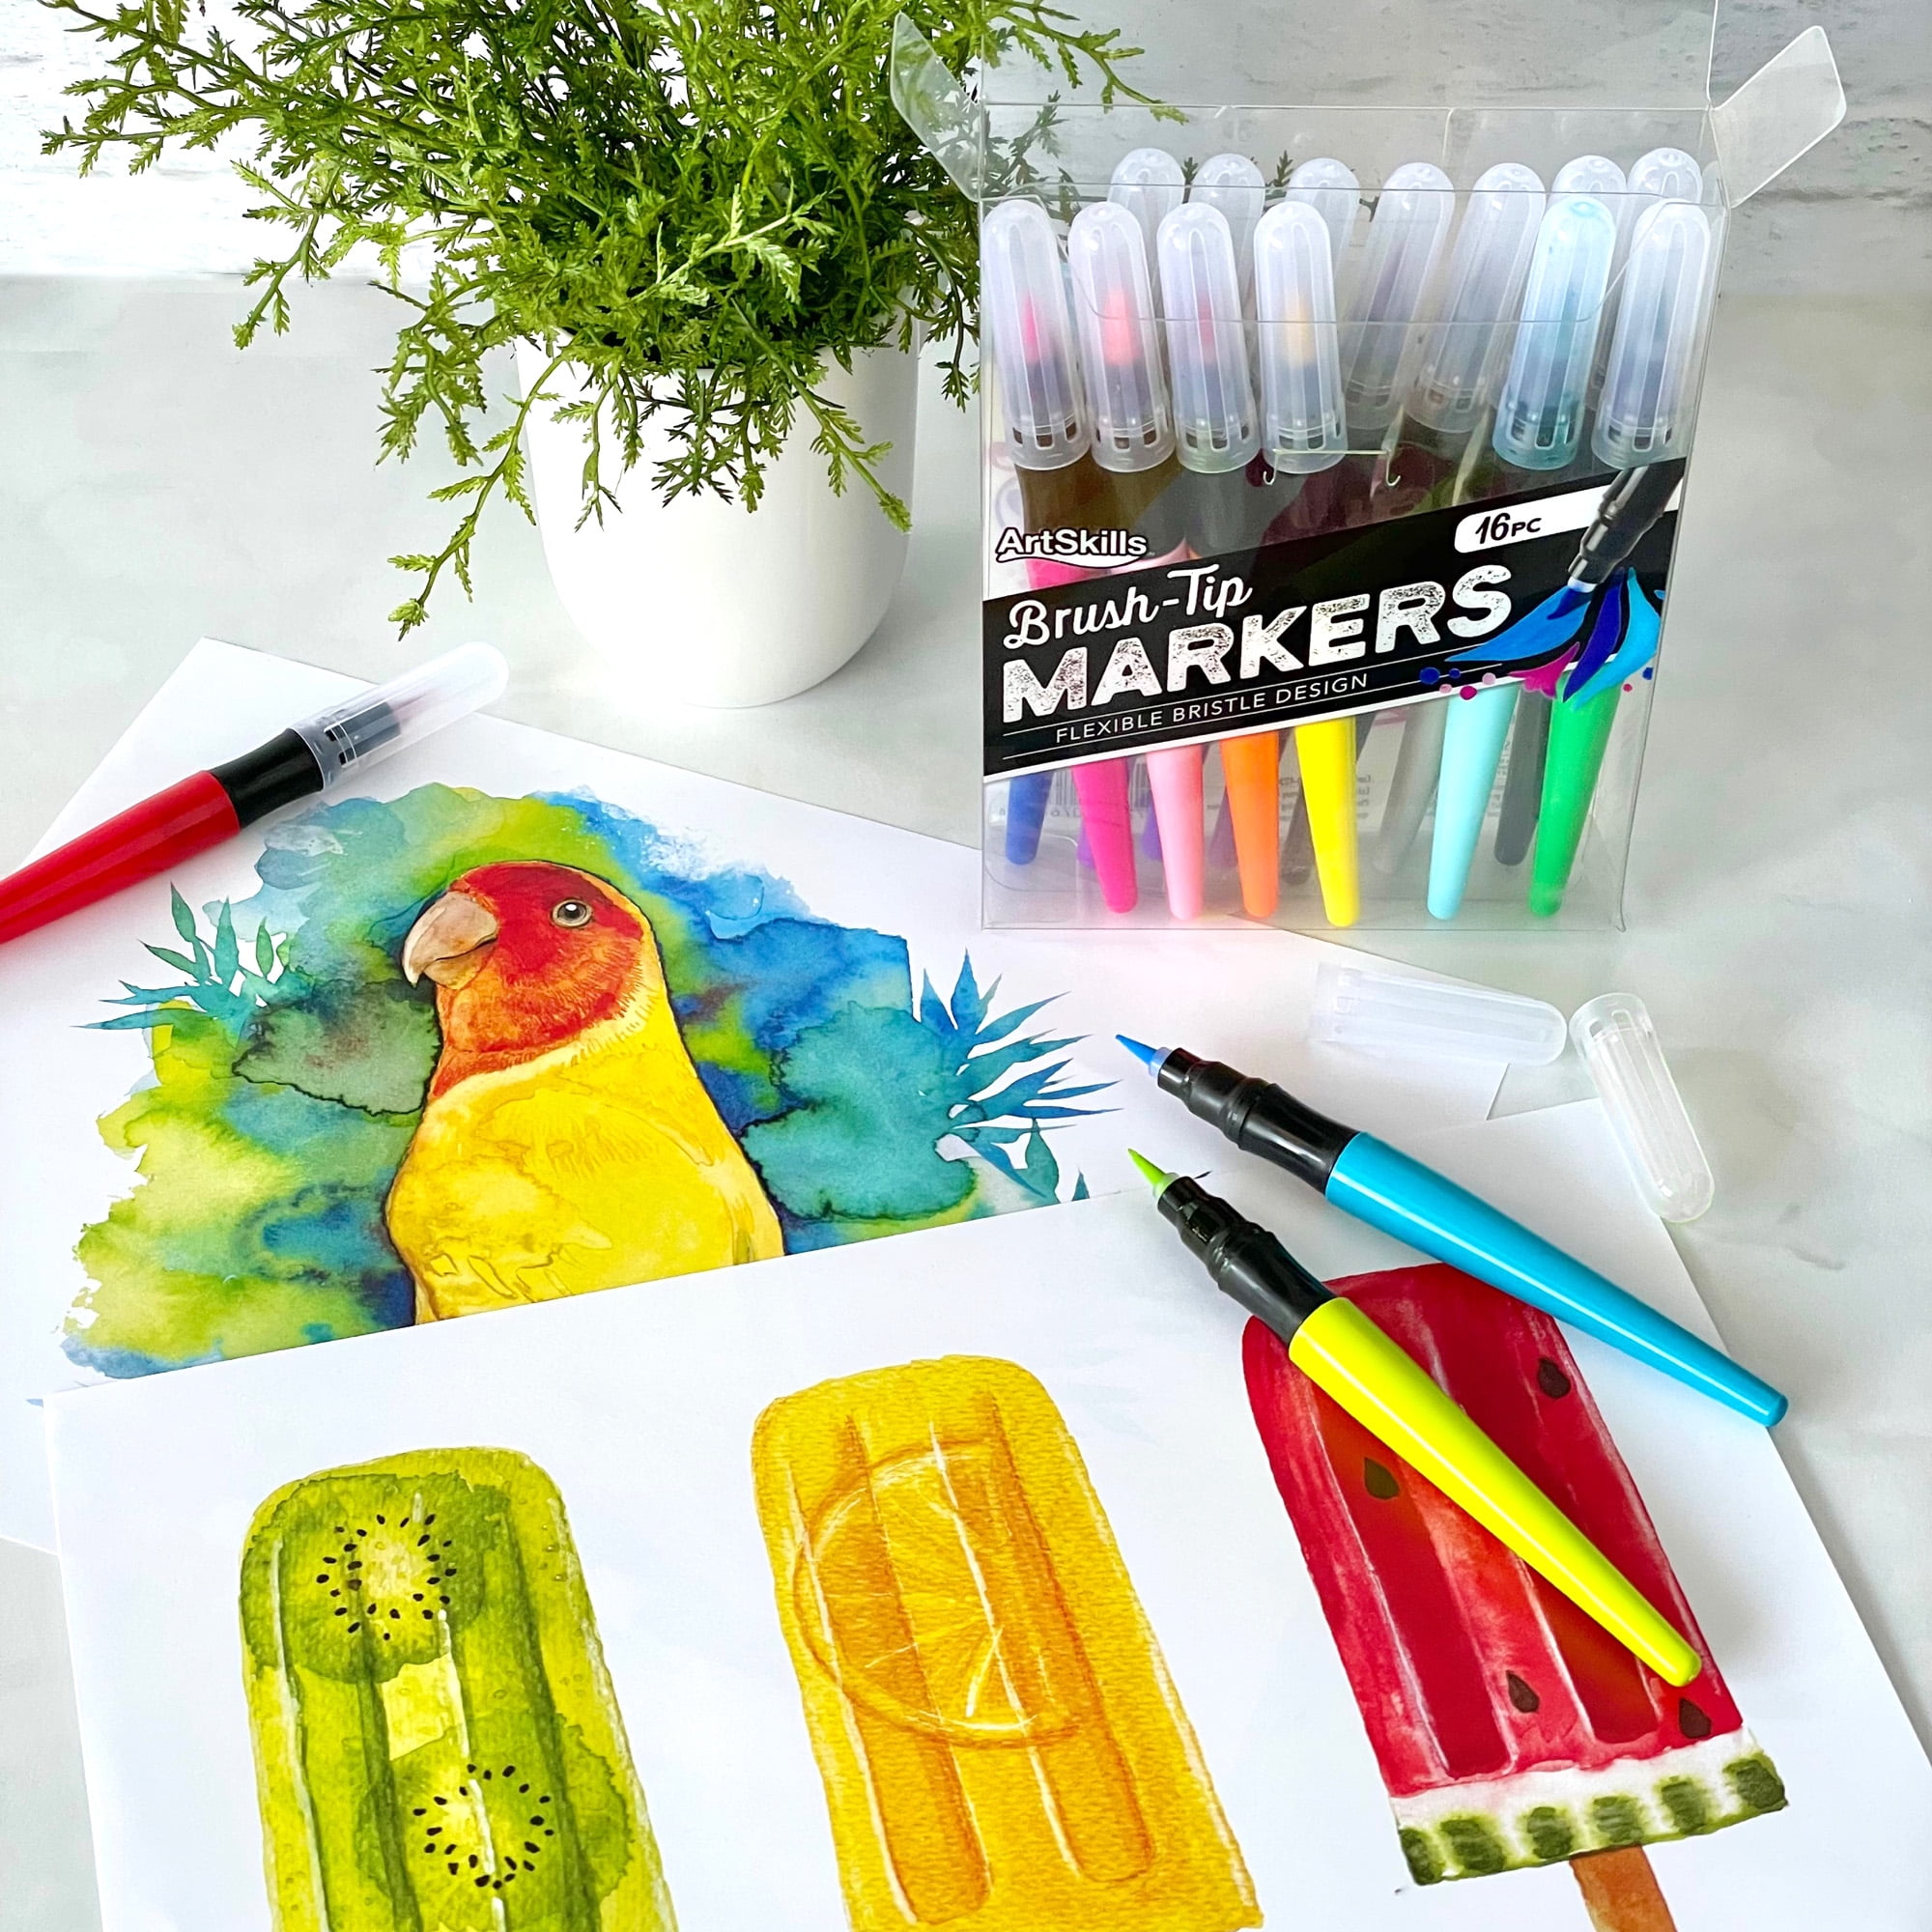  ArtSkills Brush Tip Markers - Flexible Paint Brush Markers for  Lettering and Calligraphy Pens, Art Markers for Artists : Arts, Crafts &  Sewing